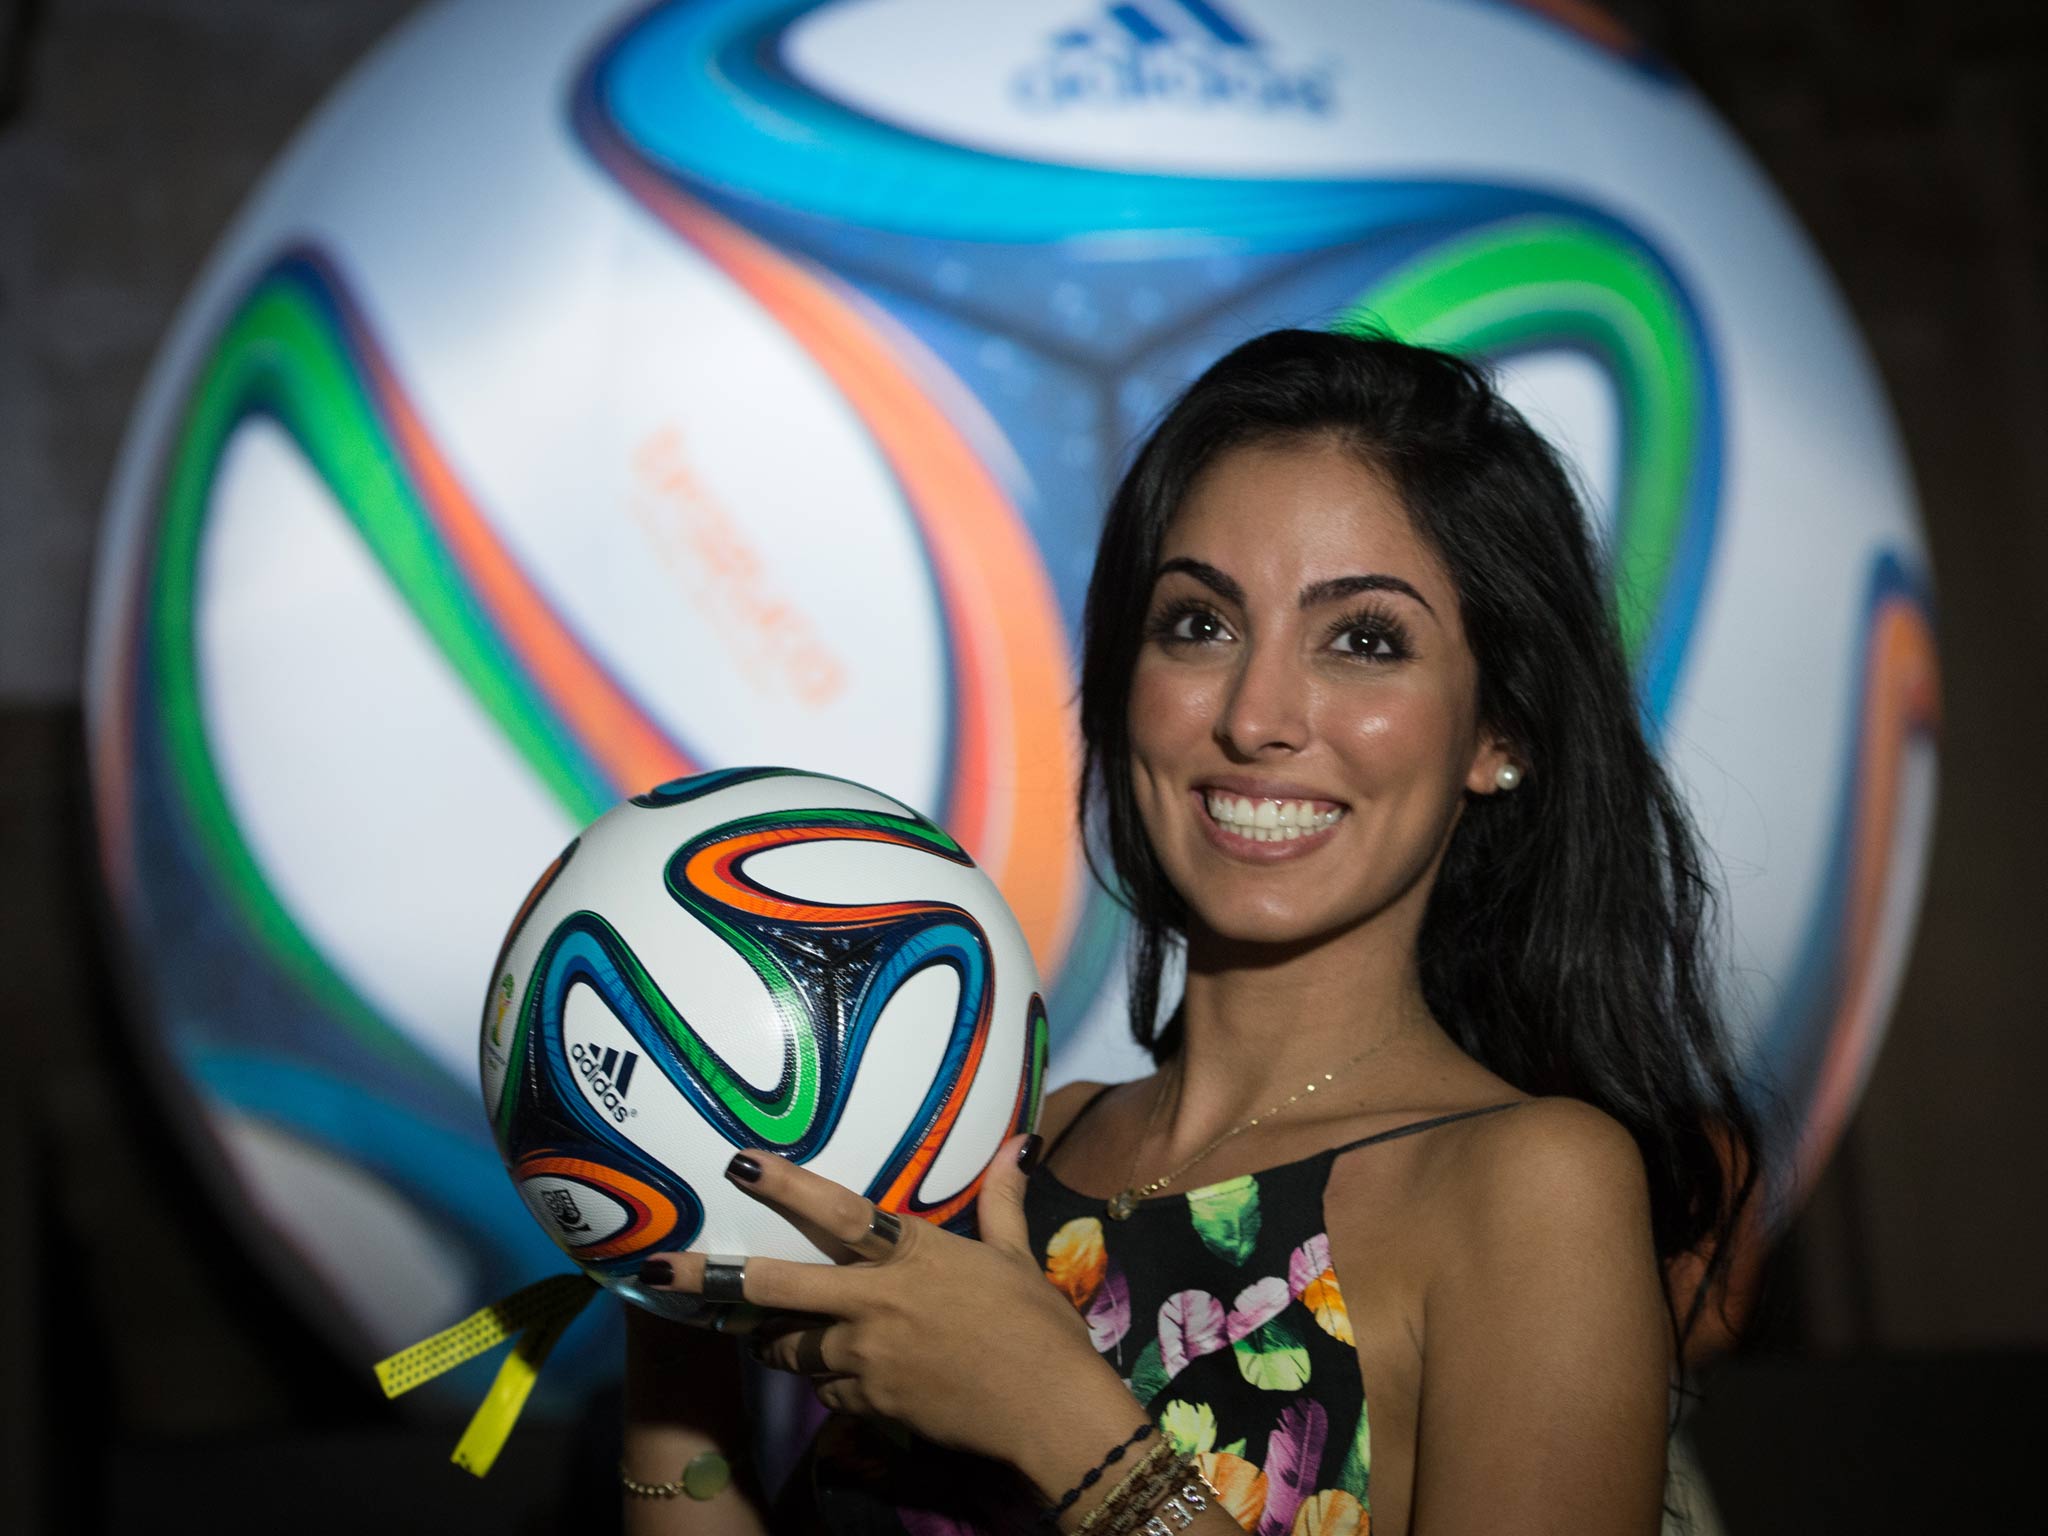 VIDEO: From Telstar to Brazuca - The Evolution of FIFA World Cup Balls